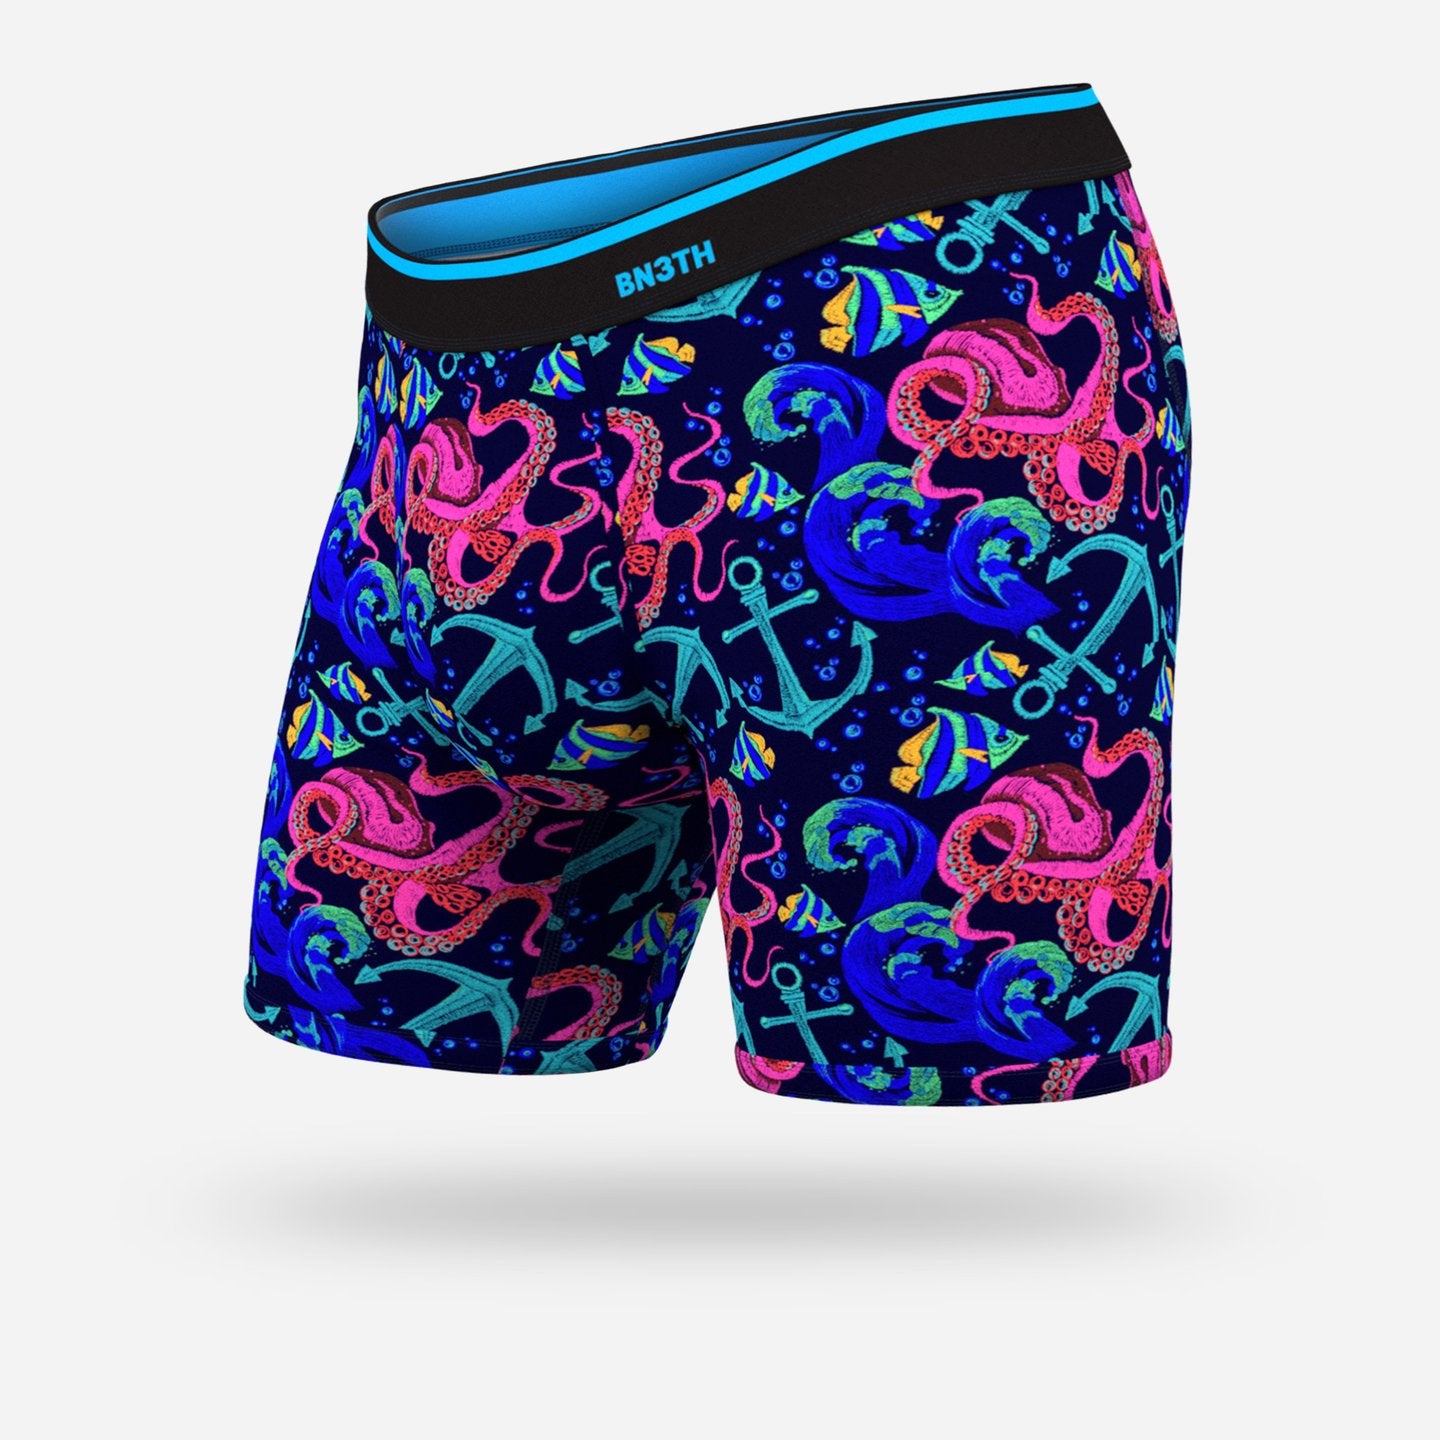 BN3TH 6.5" Classic Boxer Brief - Under the Sea - Navy